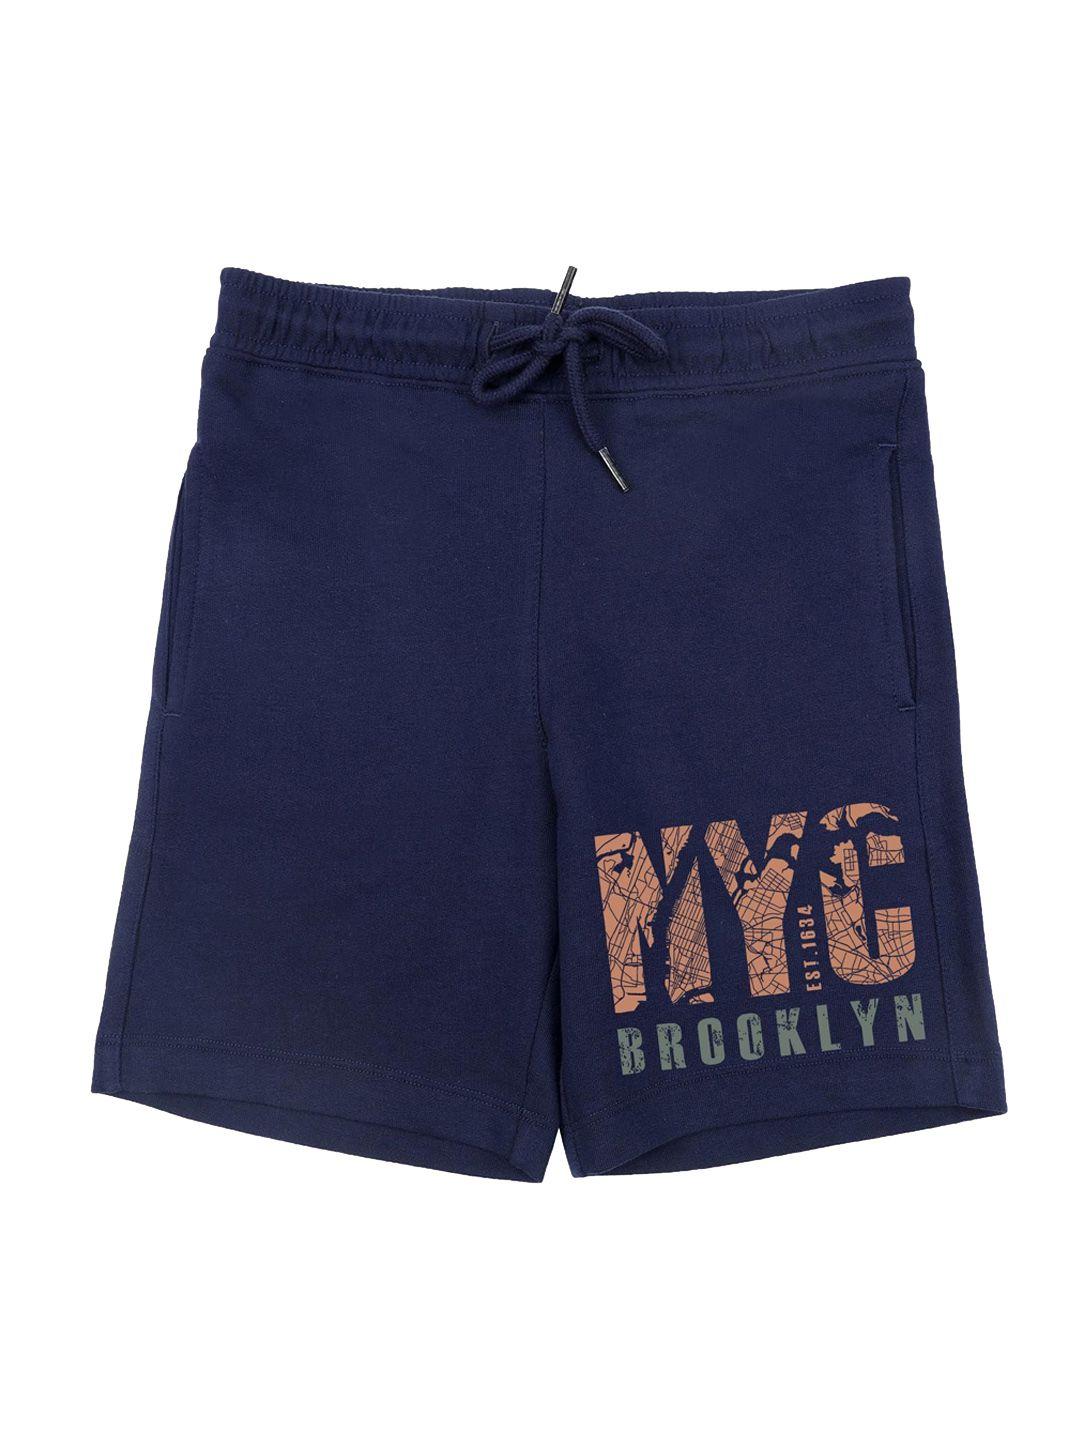 wear-your-mind-boys-navy-blue-&-peach-coloured-typography-printed-shorts